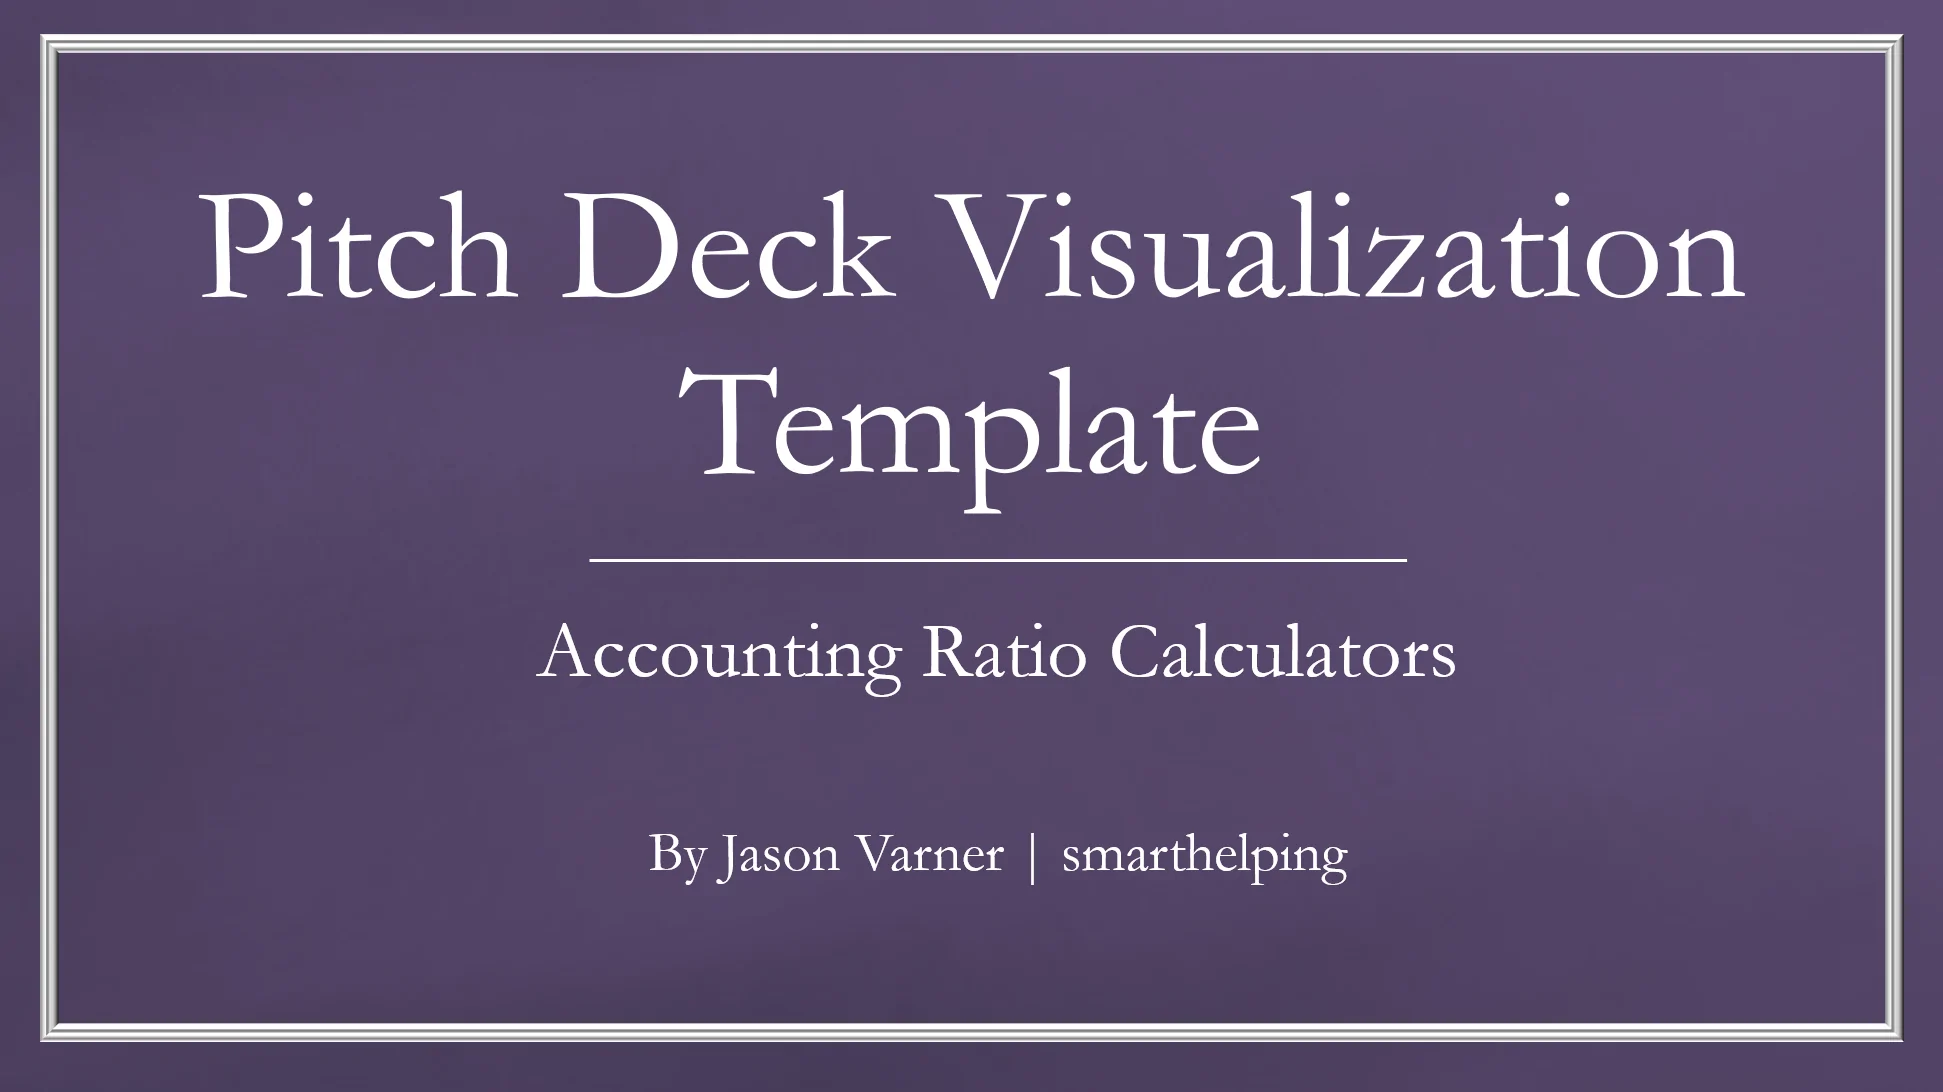 Pitch Deck Financial Visualizations Template (Excel workbook (XLSX)) Preview Image